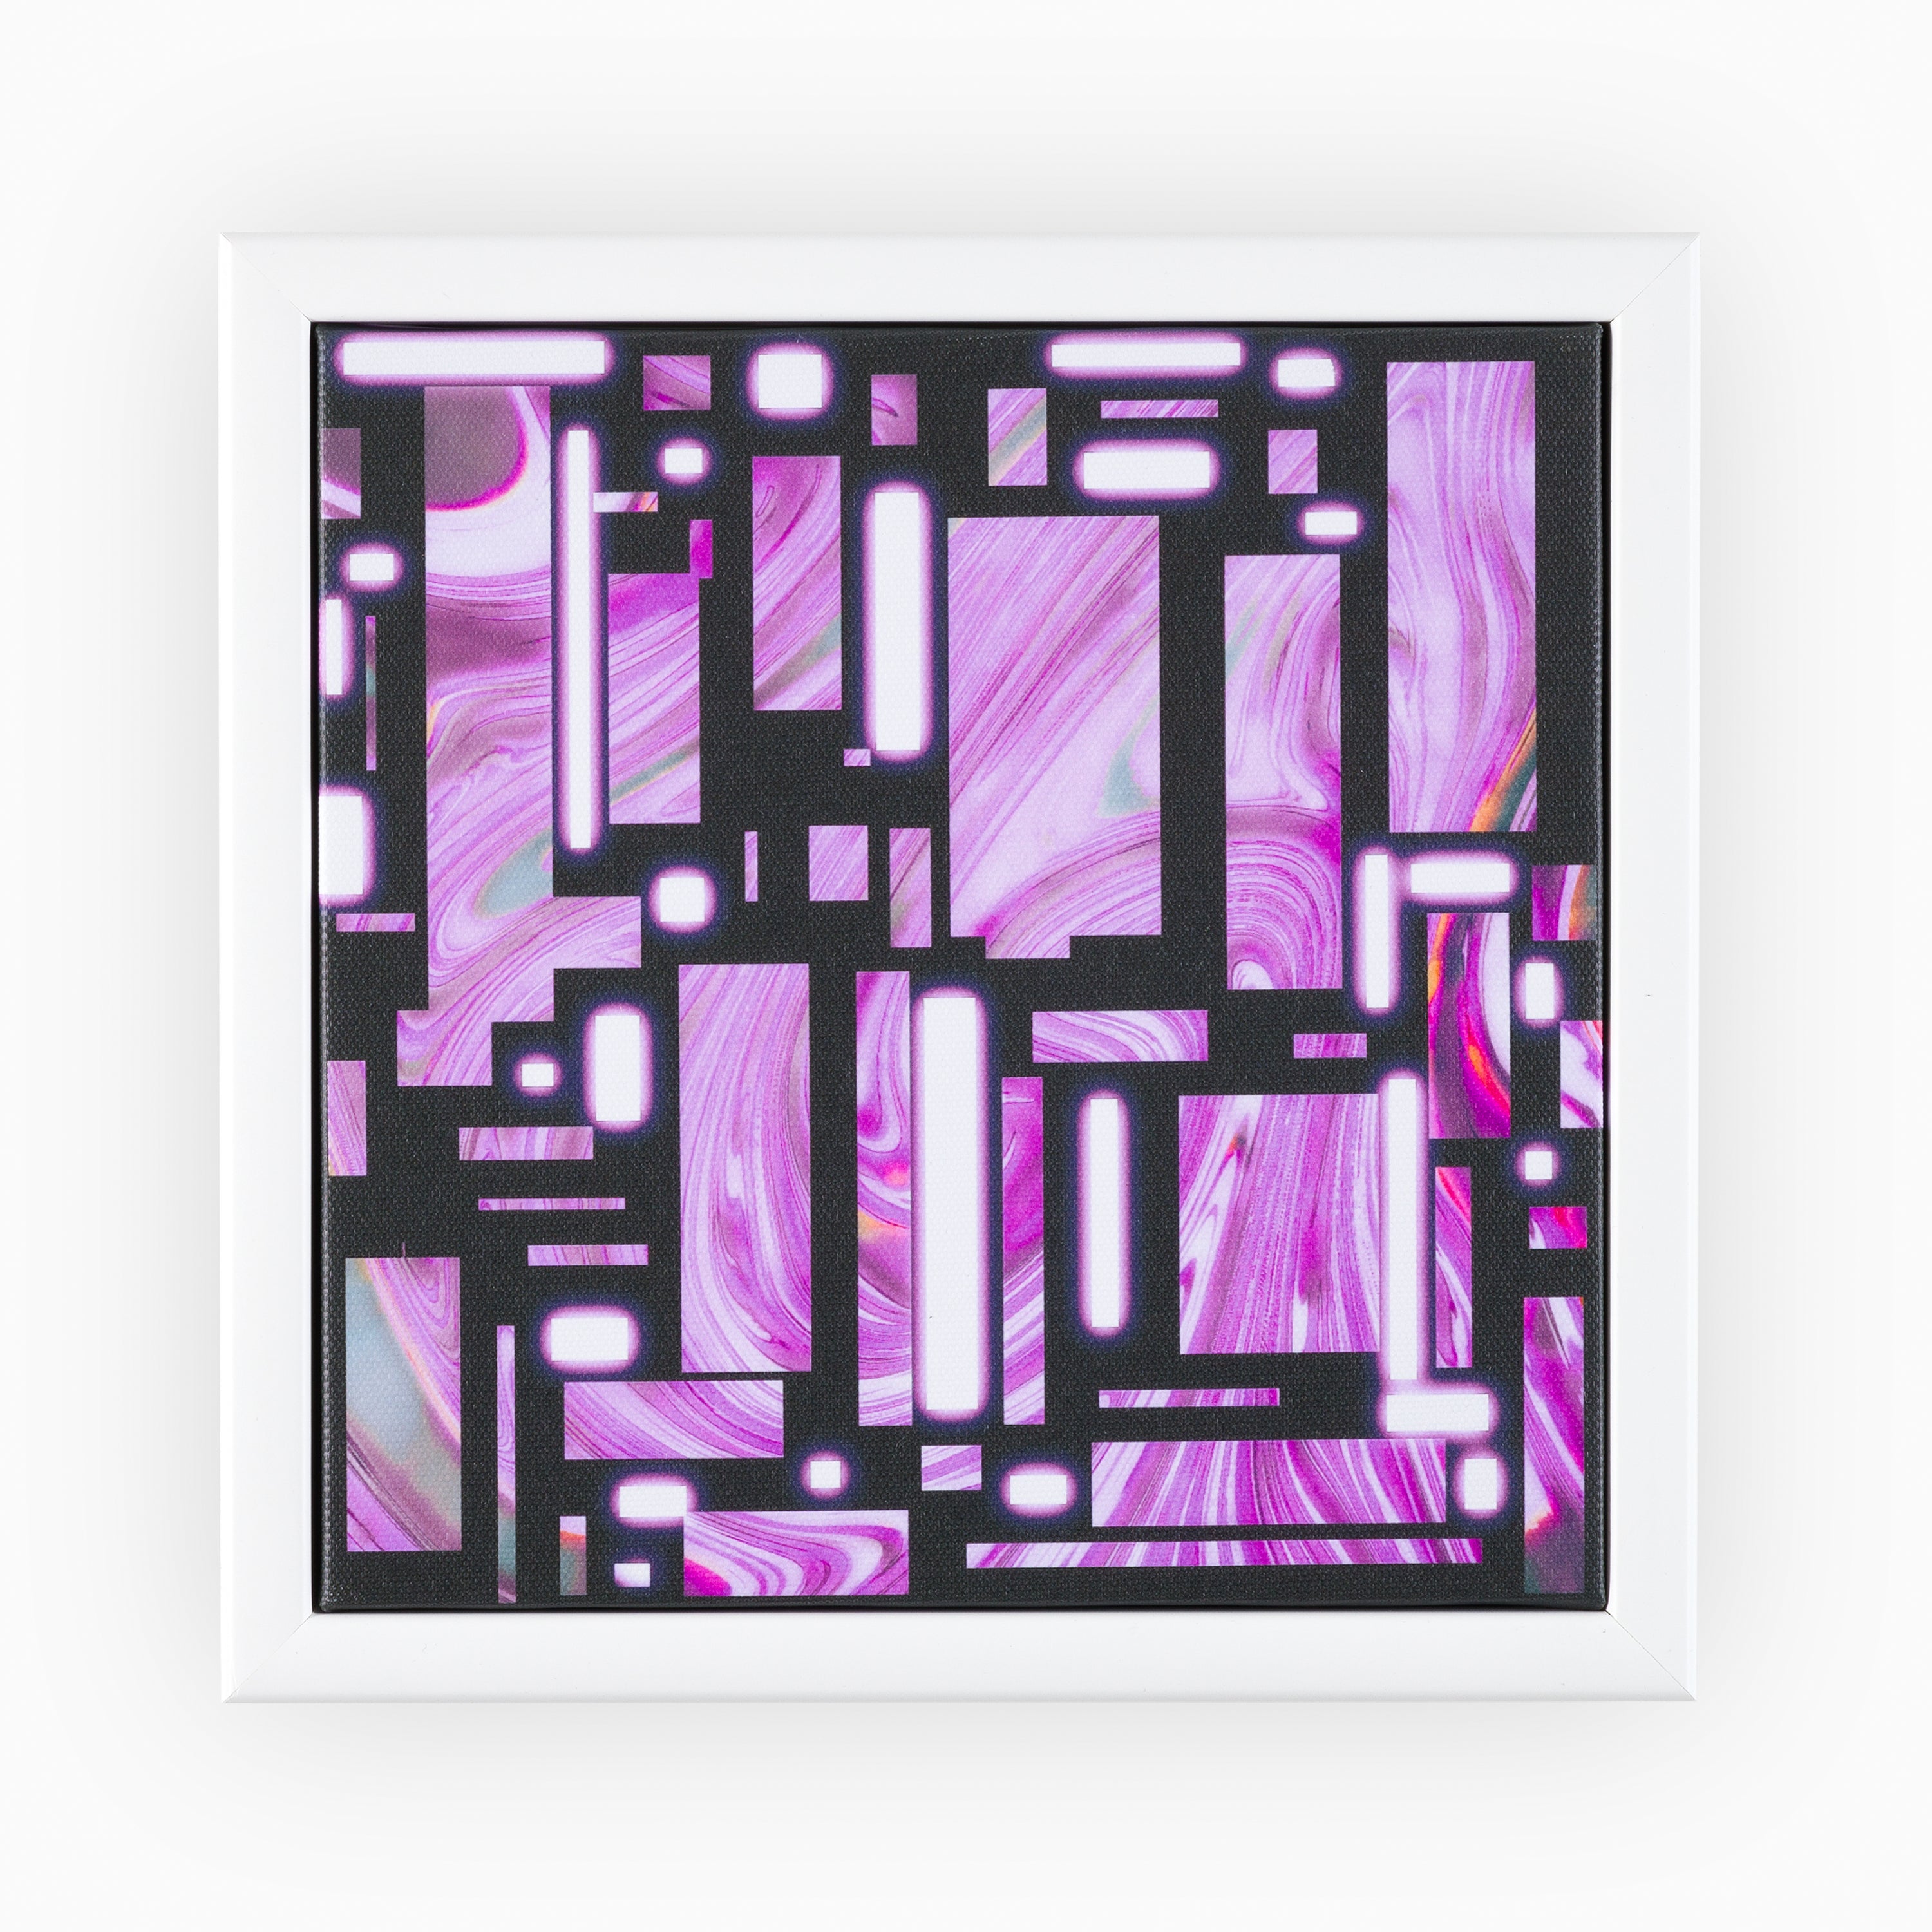 Contemporary abstract canvas artwork with a bold geometric overlay on a marble-effect background in hues of purple and white, presented within an elegant white frame.